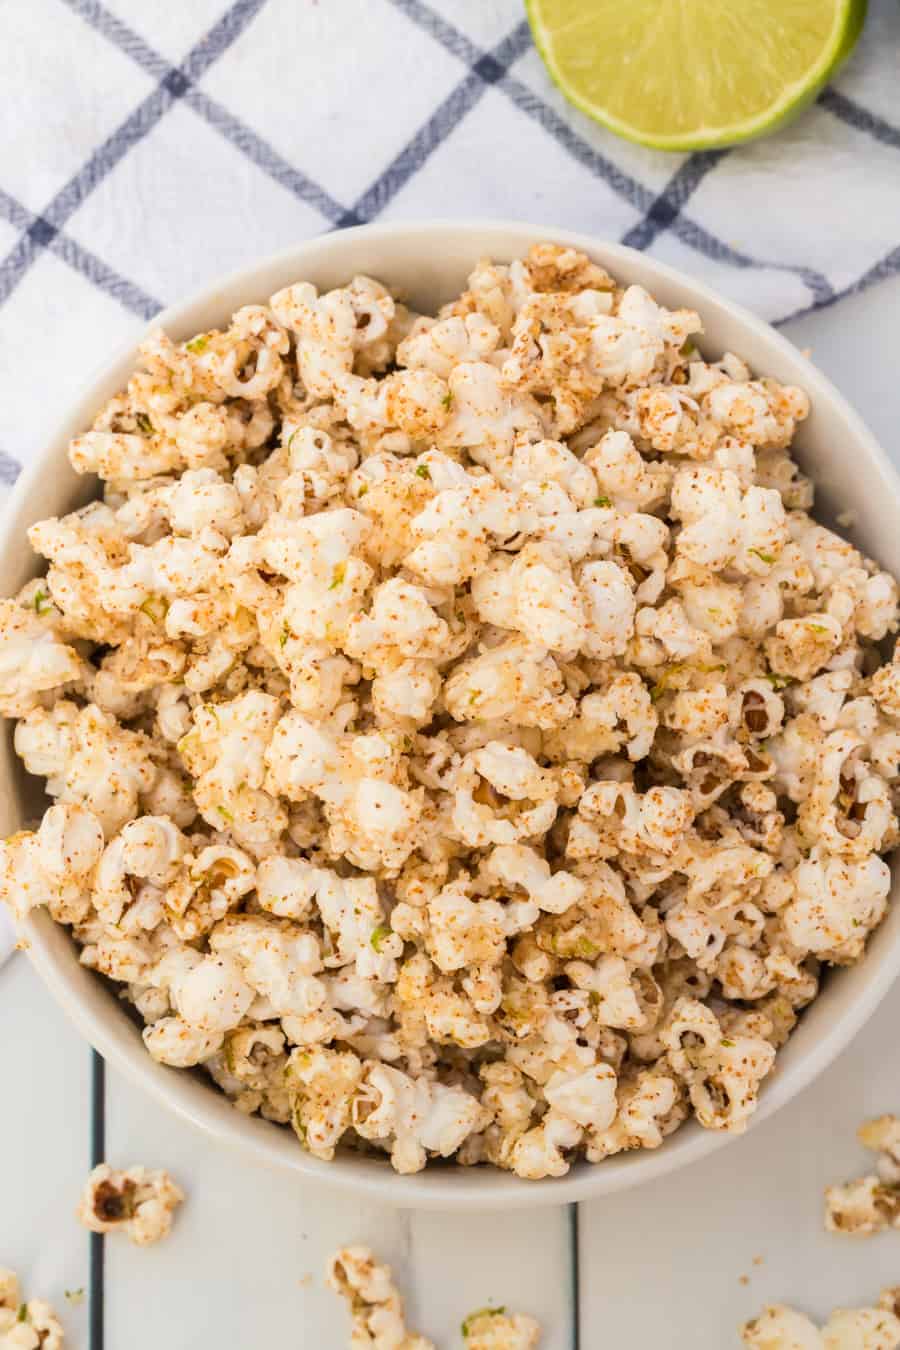 Quick and easy cheesy chili lime popcorn made with fresh popcorn, butter, cotija cheese, and chili powder make one tasty and simple snack. #popcorn #popcornrecipes #savorypopcorn #limepopcorn